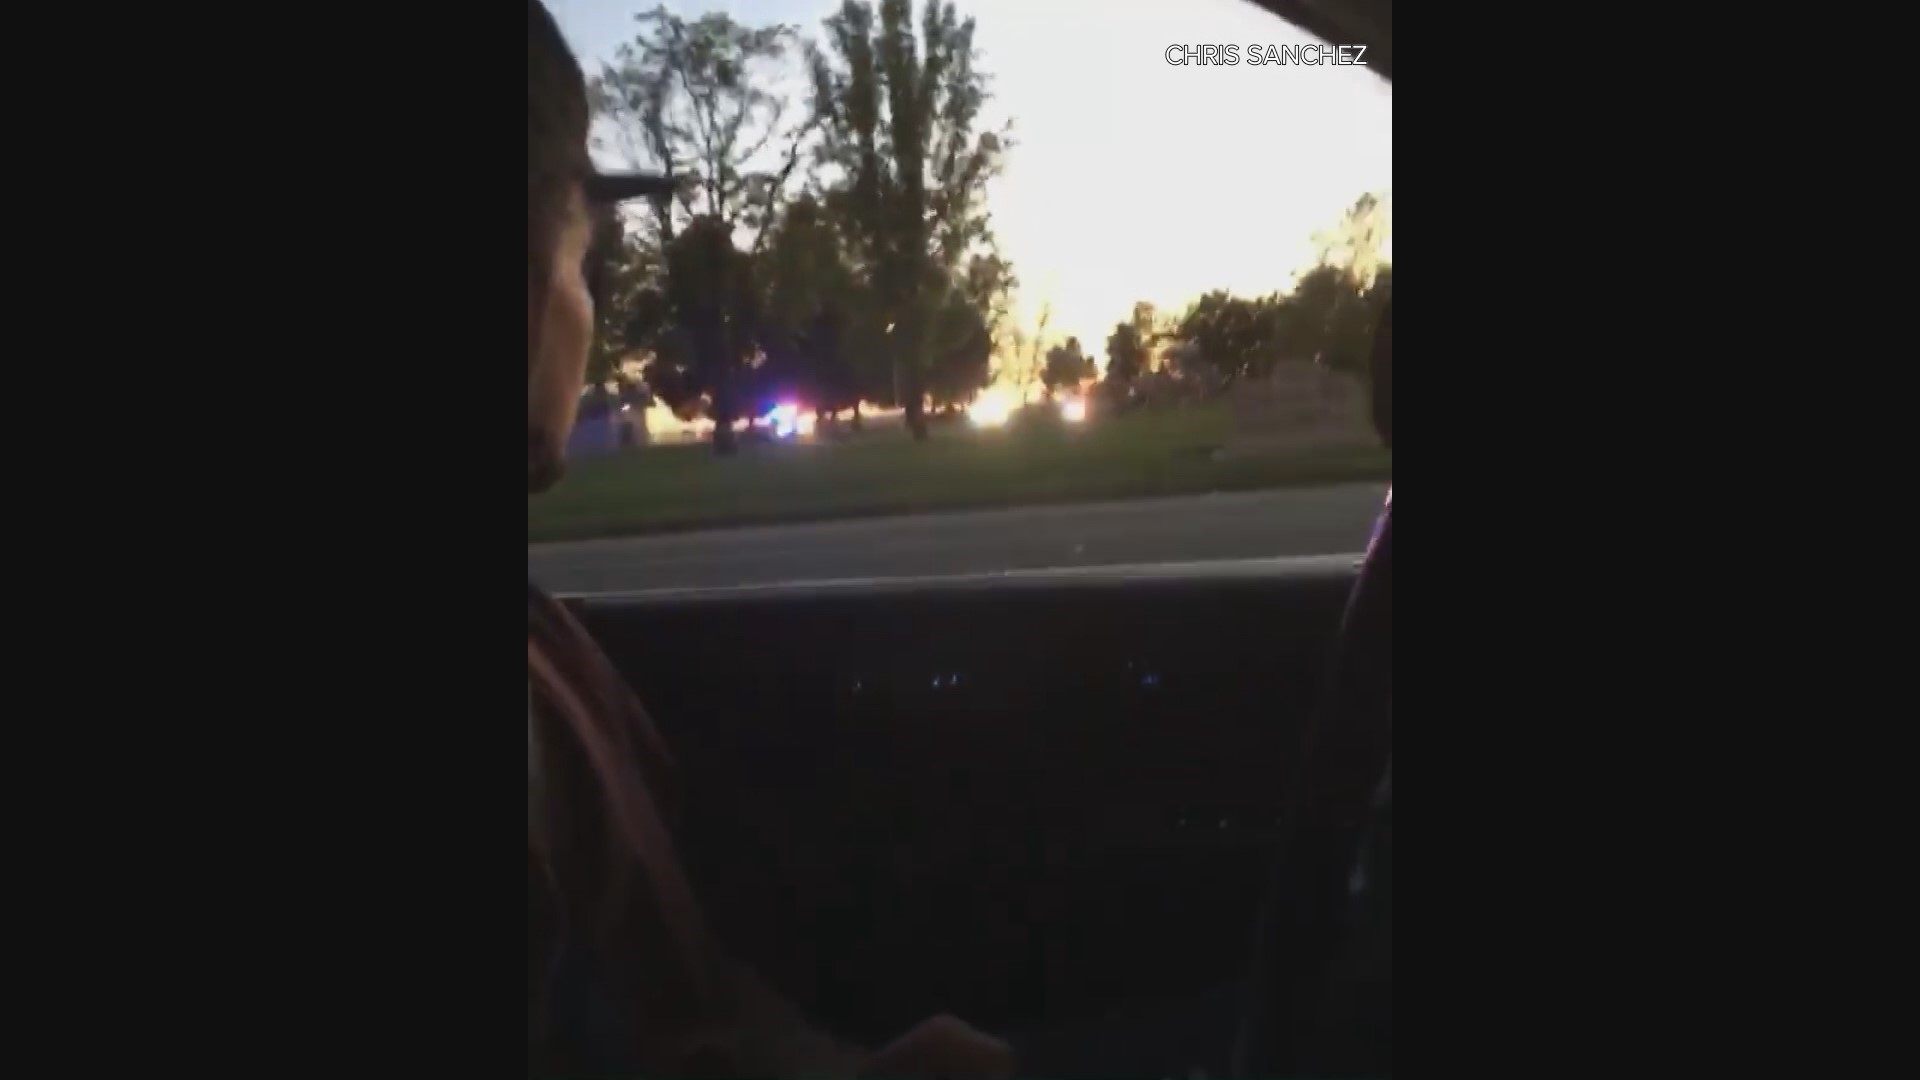 A concerned father captured video of a dramatic police chase through Meadowview Park on Easter Sunday. Officers were after a guy wanted for driving recklessly on a motorcycle.